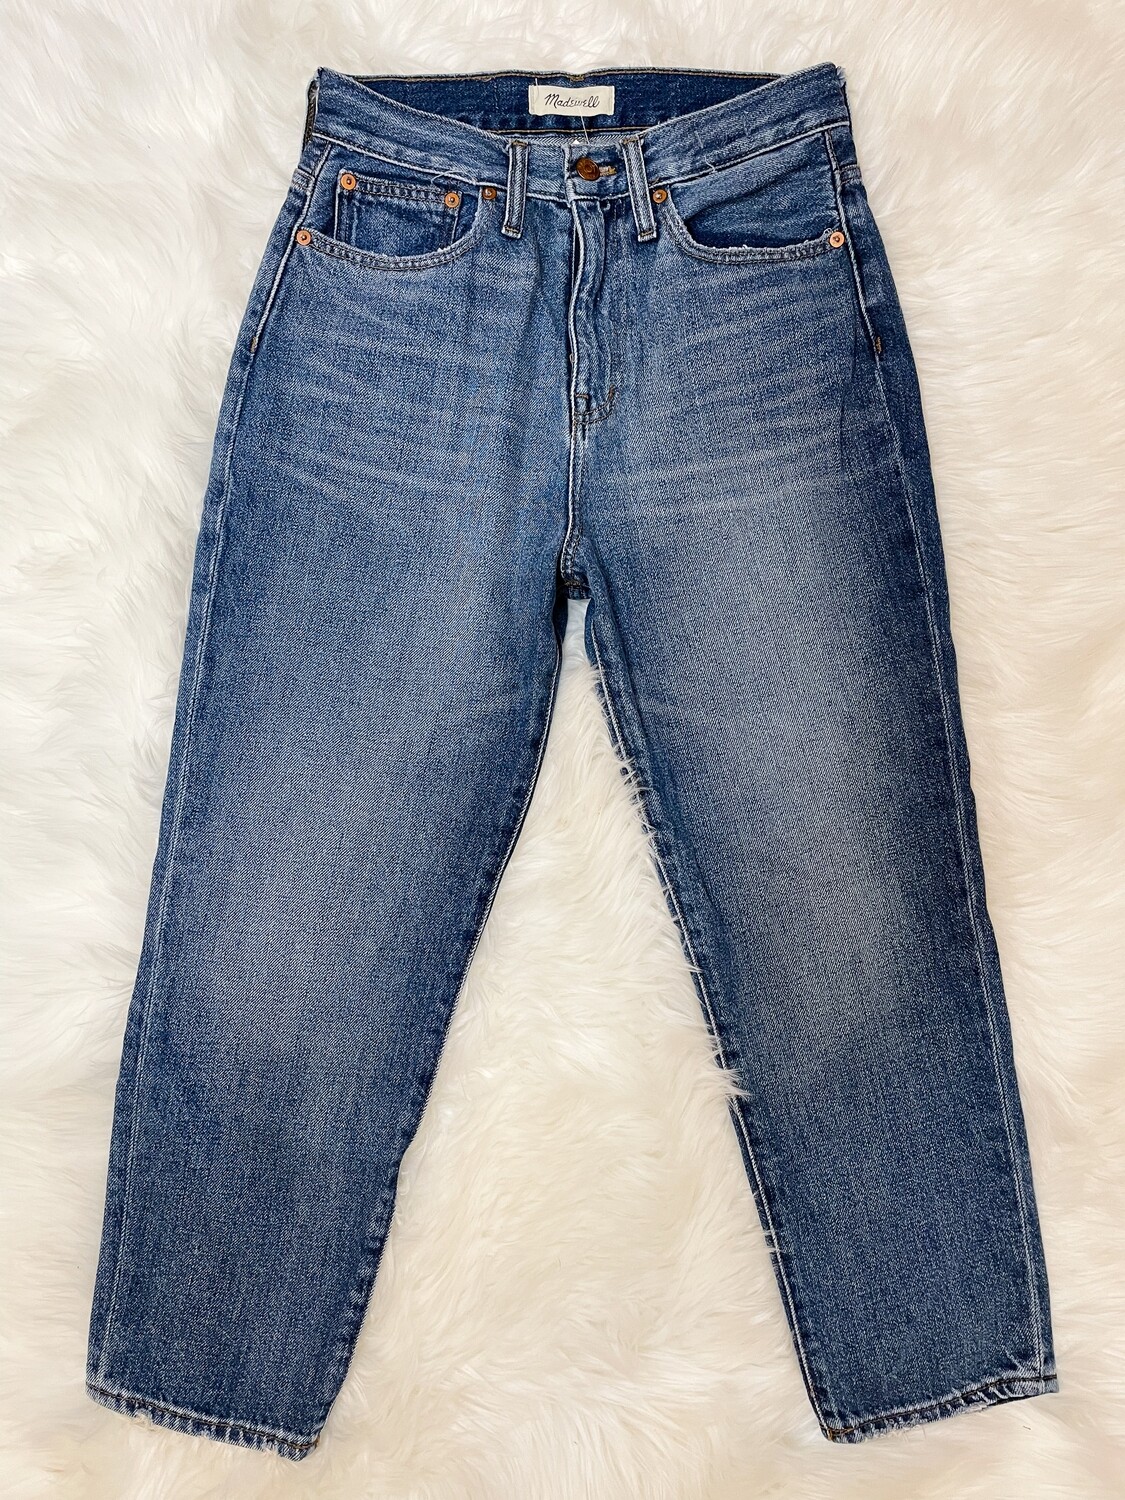 Madewell The Mom Jean - Size 26